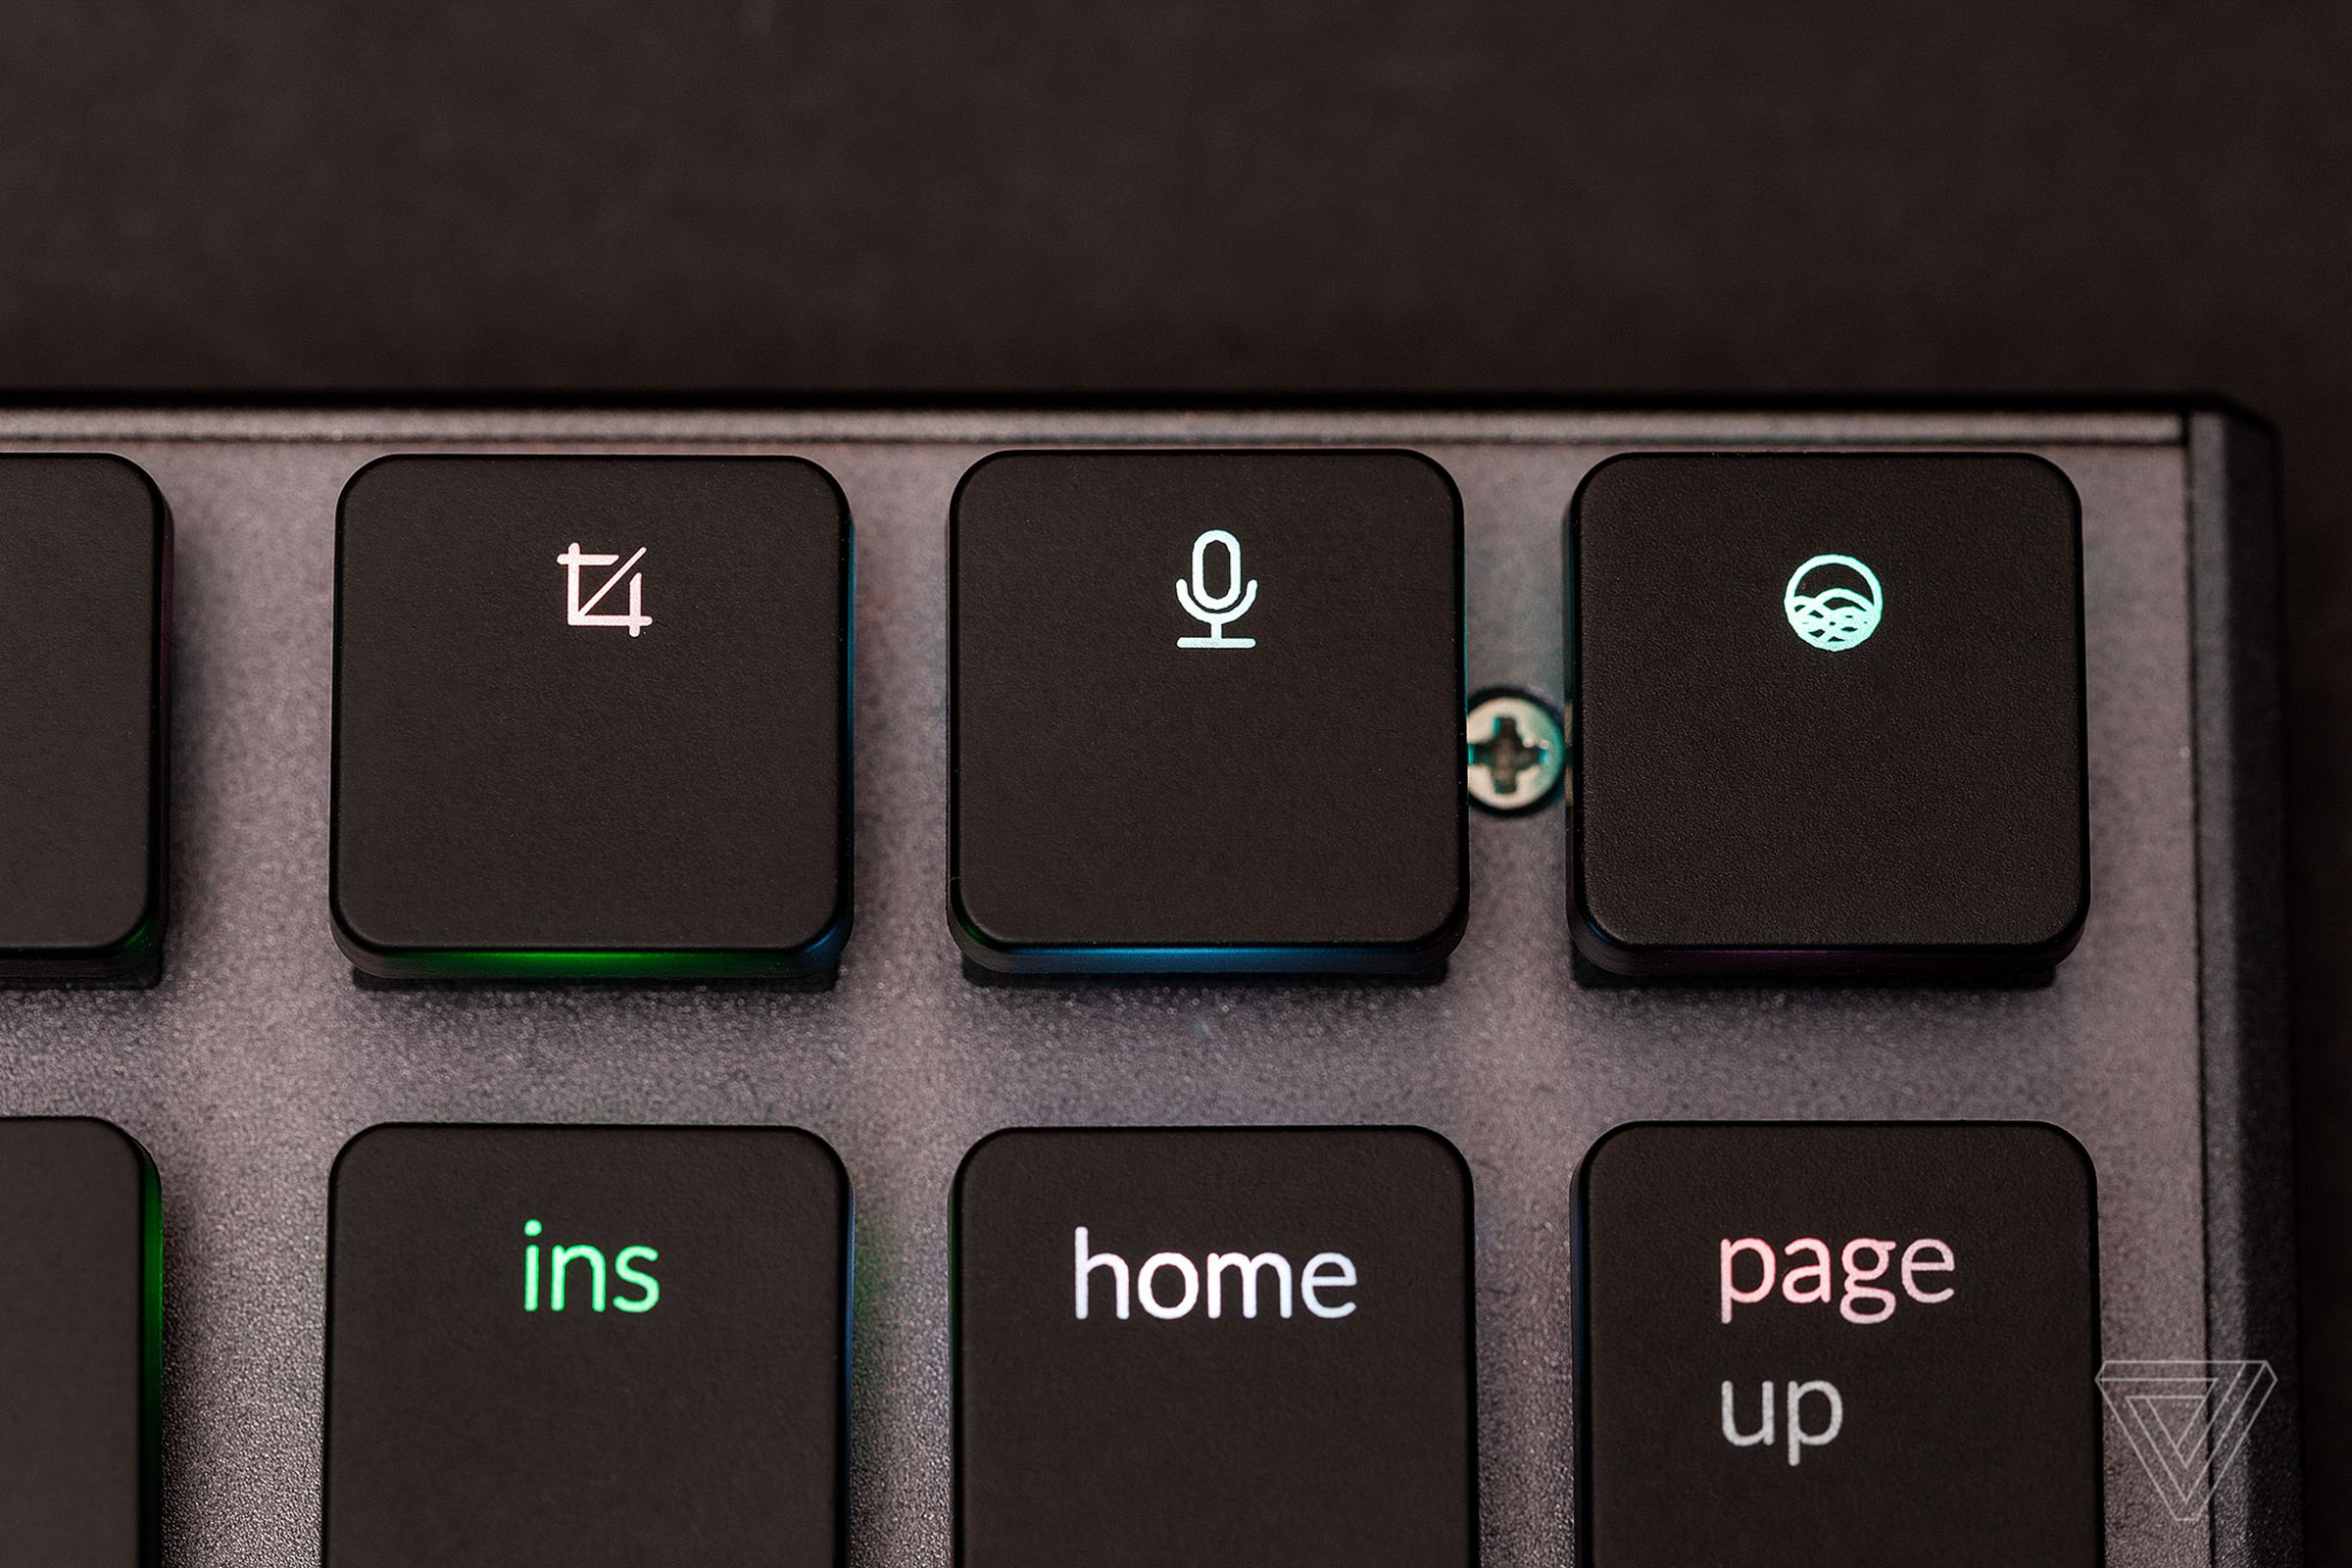 The K1 has dedicated buttons for screenshots, Siri, and voice dictation.